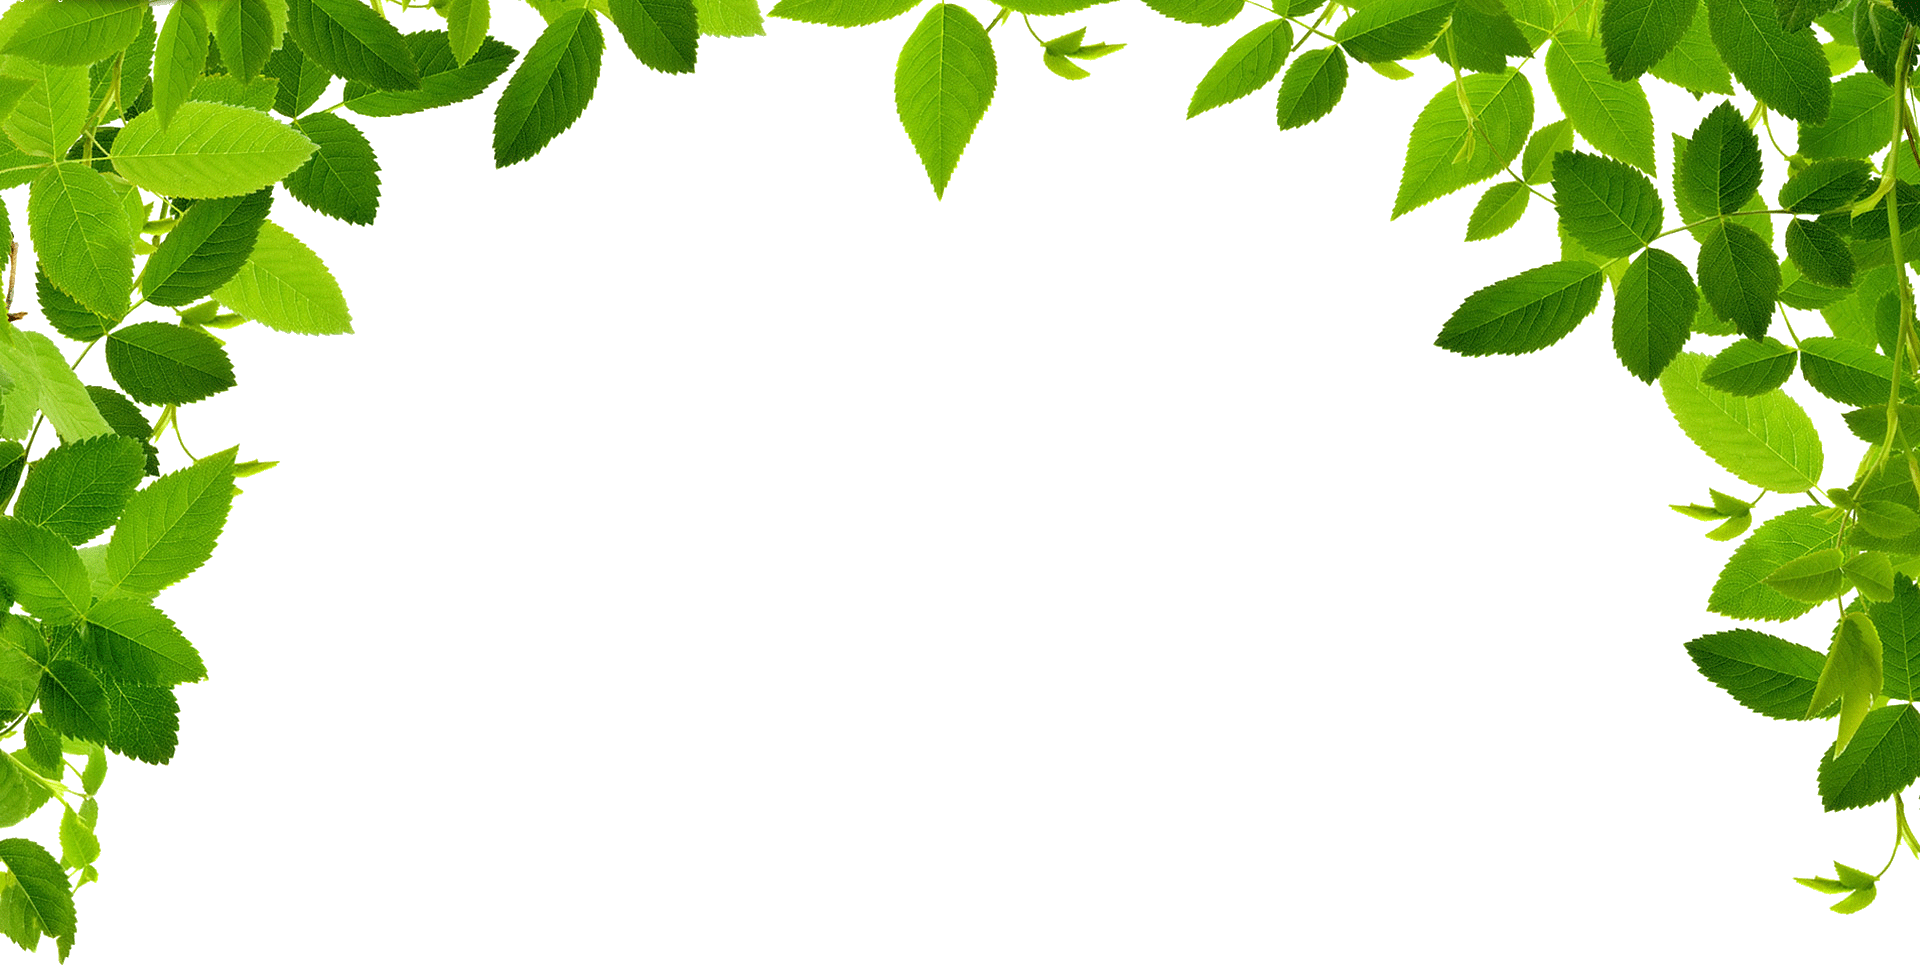 Jungle leaf borders with transparent background - ClipArt Best